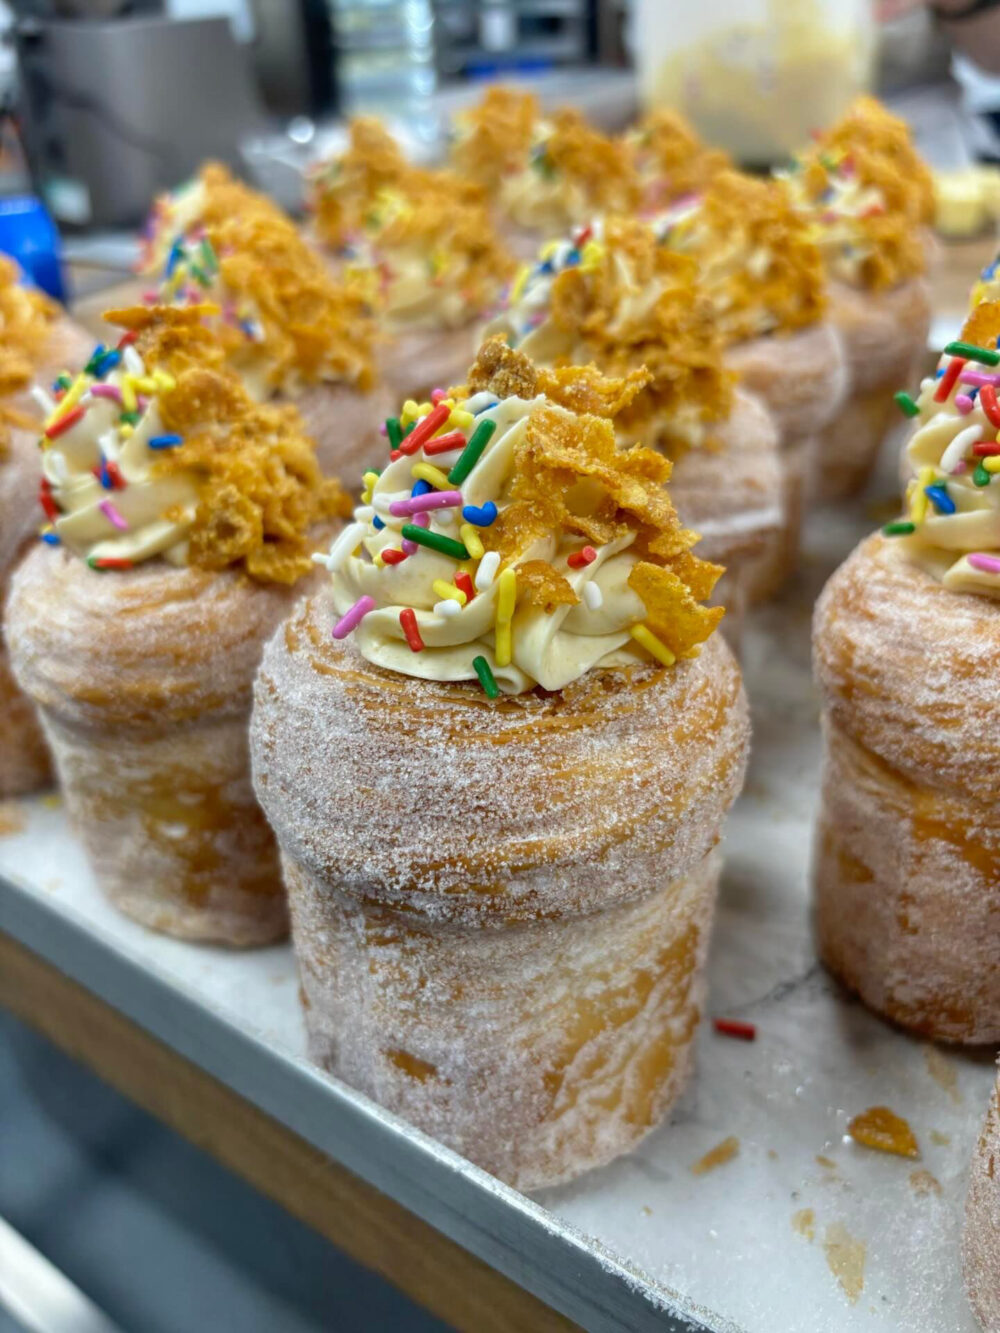 Cereal Milk Cruffin. Image provided by Pastille Bakery